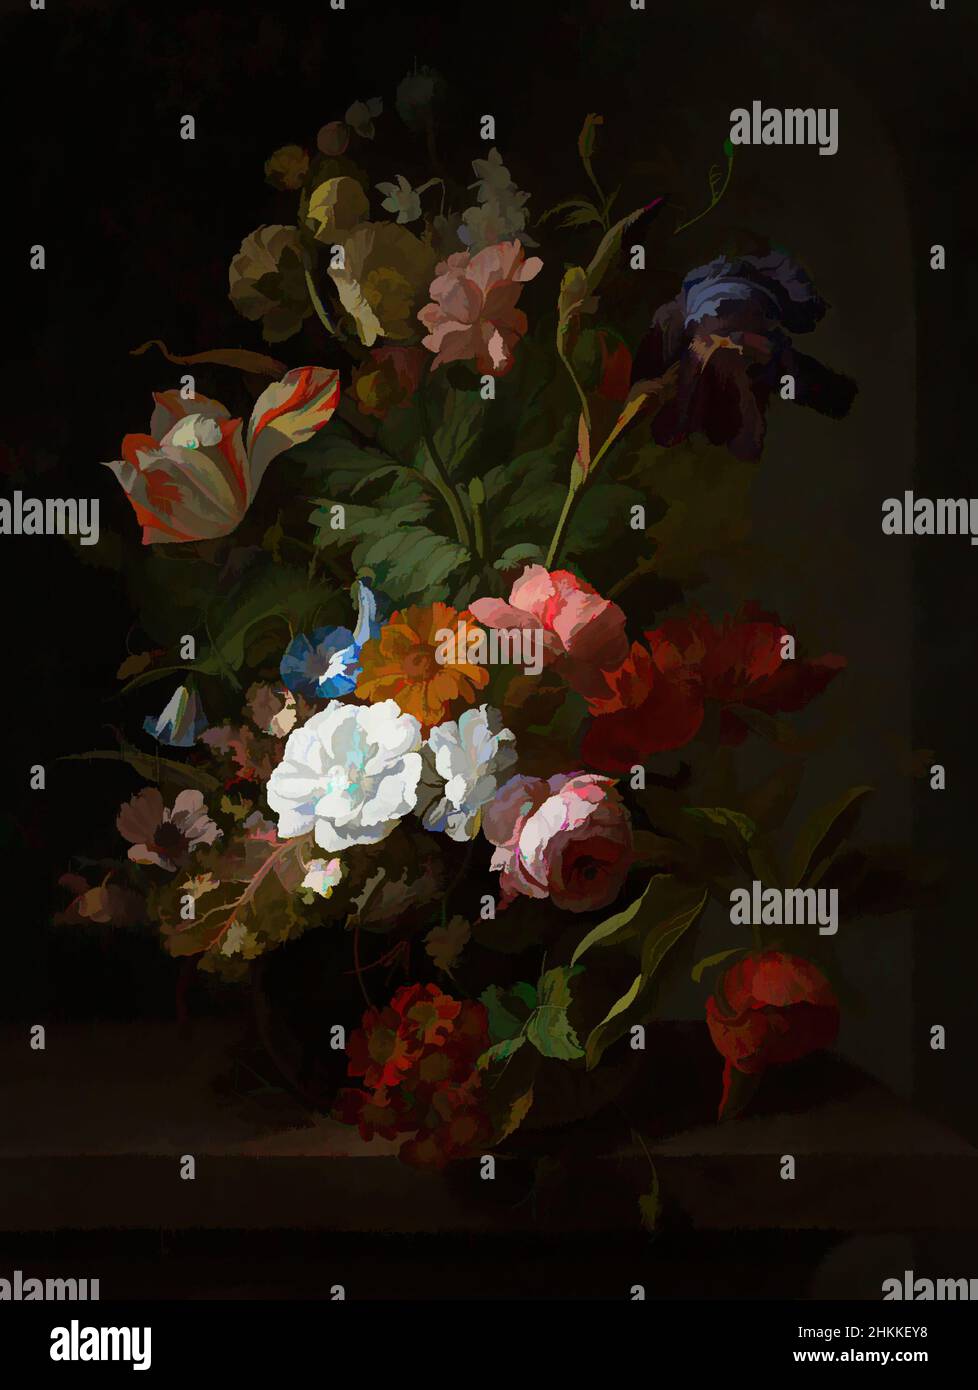 Art inspired by Vase with Flowers, Rachel Ruysch, 1700, Classic works modernized by Artotop with a splash of modernity. Shapes, color and value, eye-catching visual impact on art. Emotions through freedom of artworks in a contemporary way. A timeless message pursuing a wildly creative new direction. Artists turning to the digital medium and creating the Artotop NFT Stock Photo